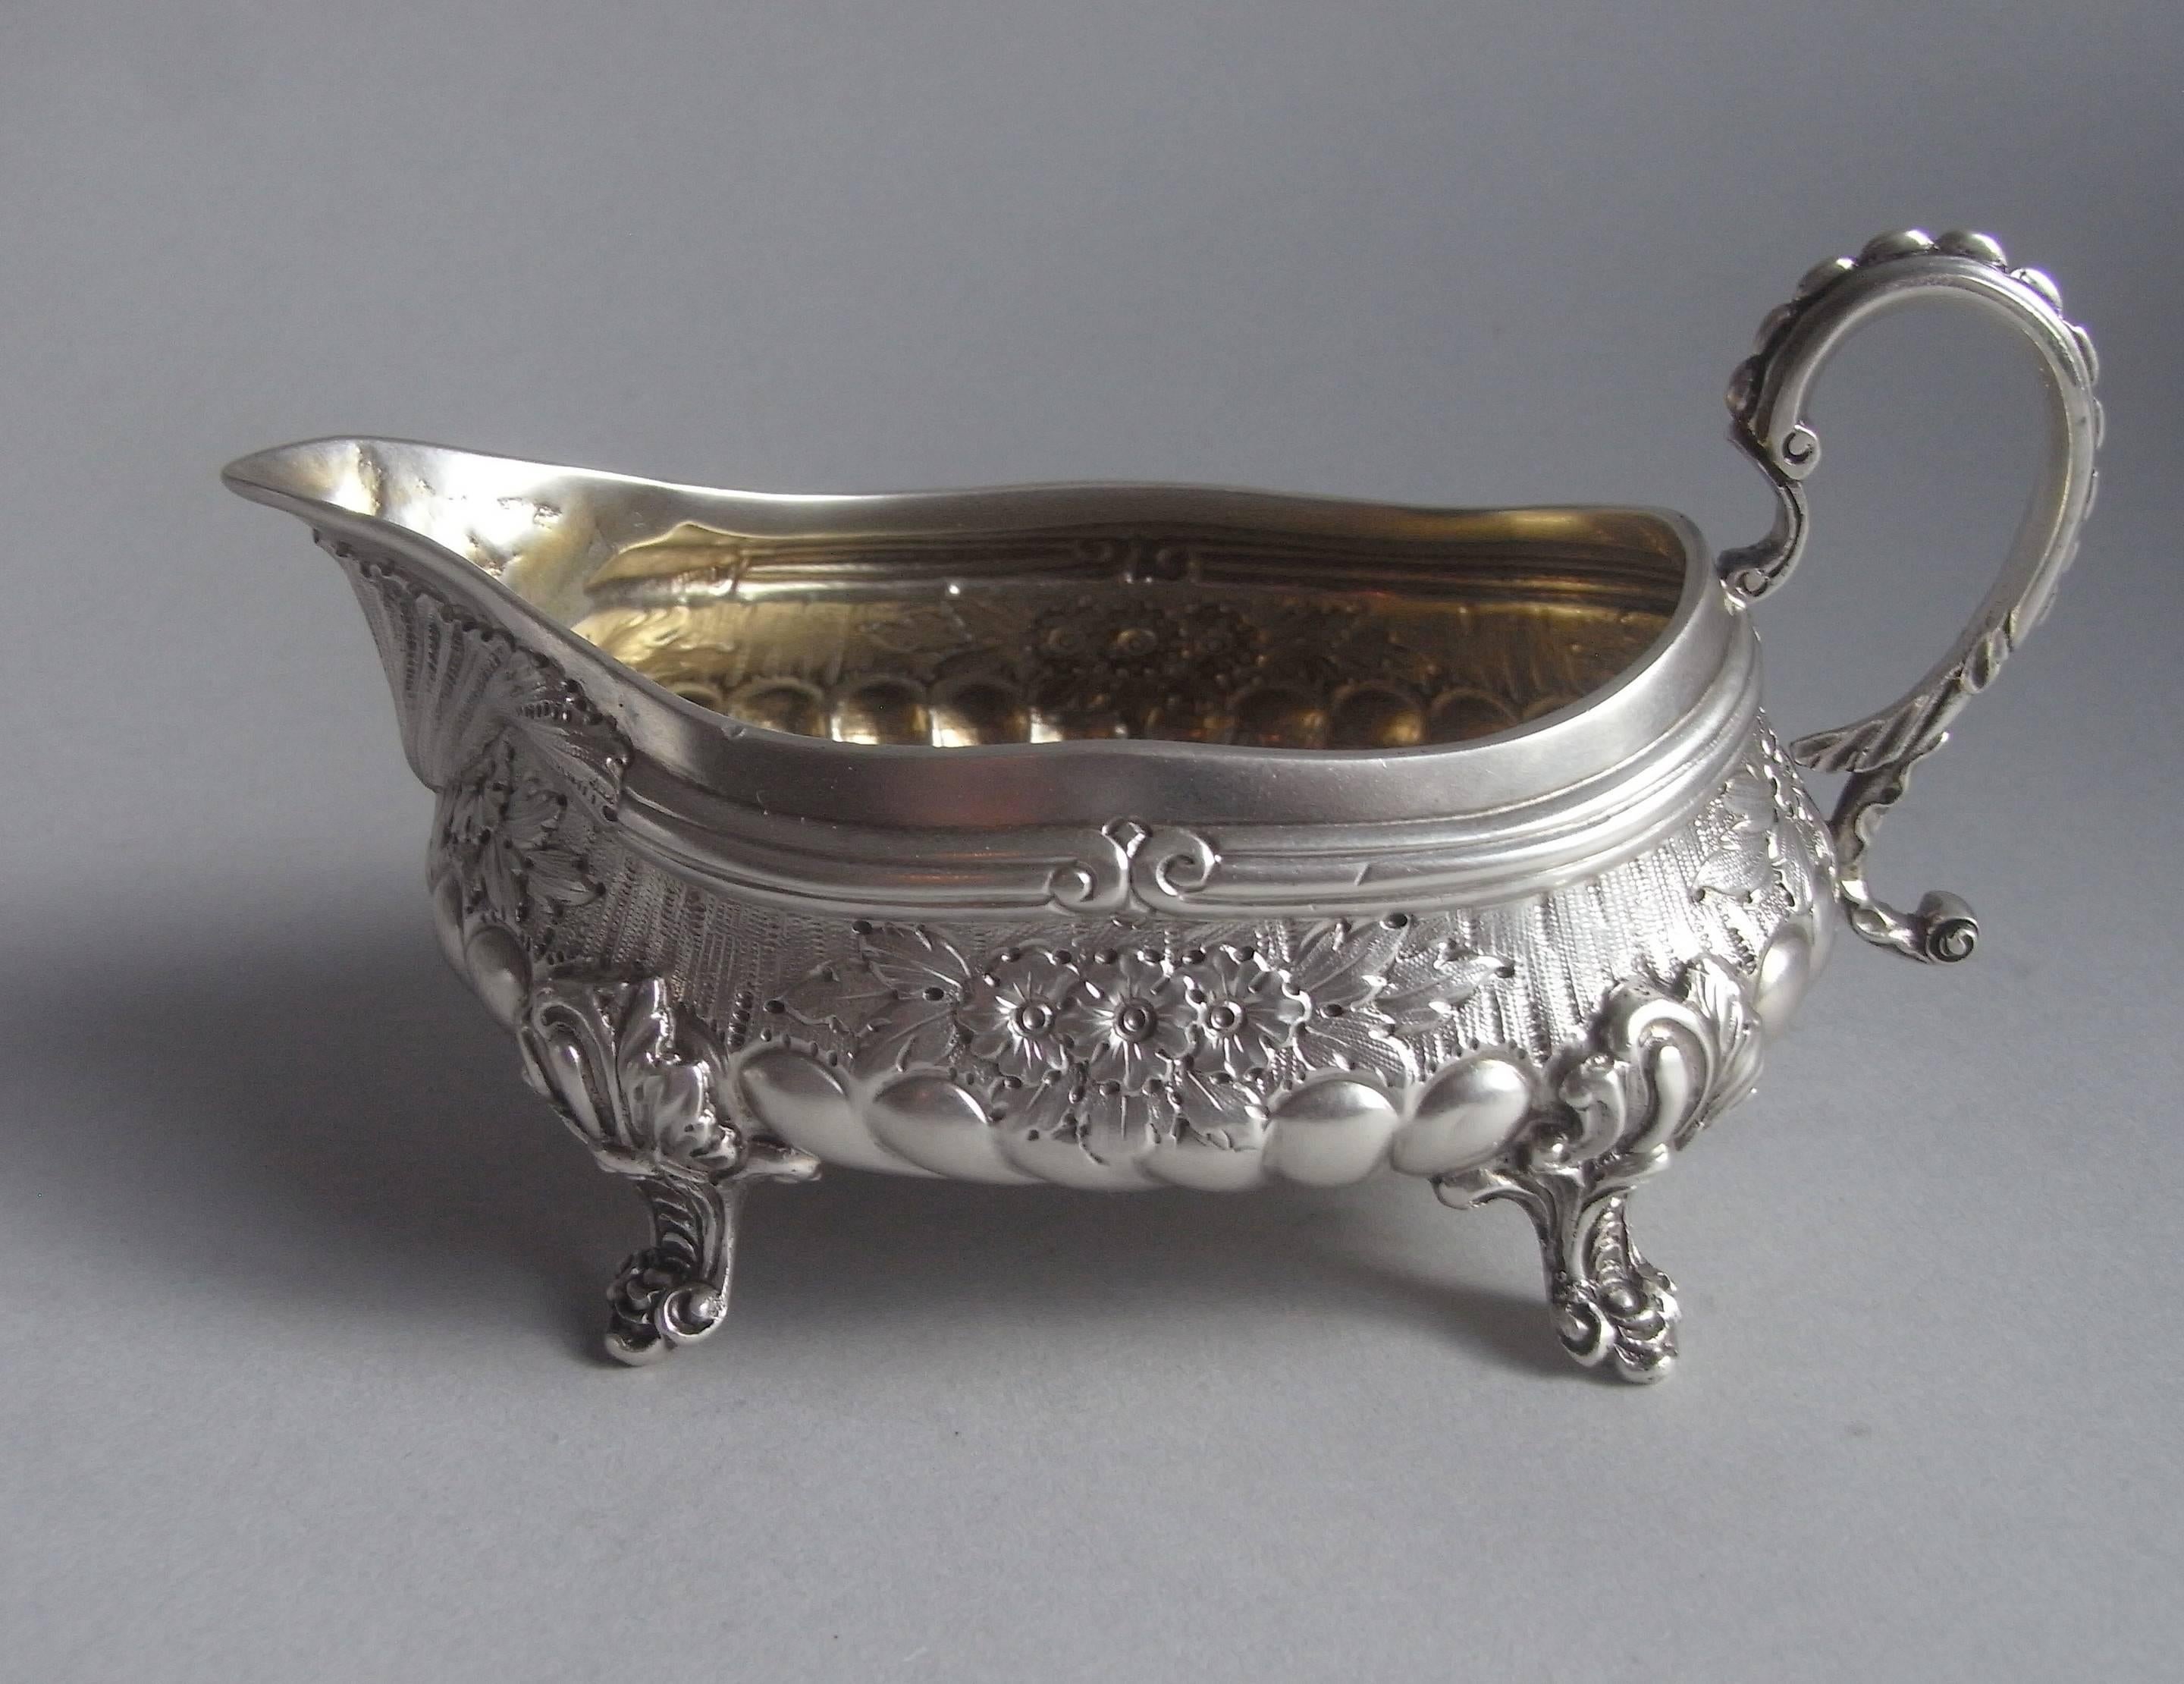 The cast cream boat is of a very unusual design in the manner of Paul de Lamerie. This piece stands on four scroll feet attached to the sides with foliate mouldings. The main body has a very unusual shallow elongated form, with sparrow beak spout.